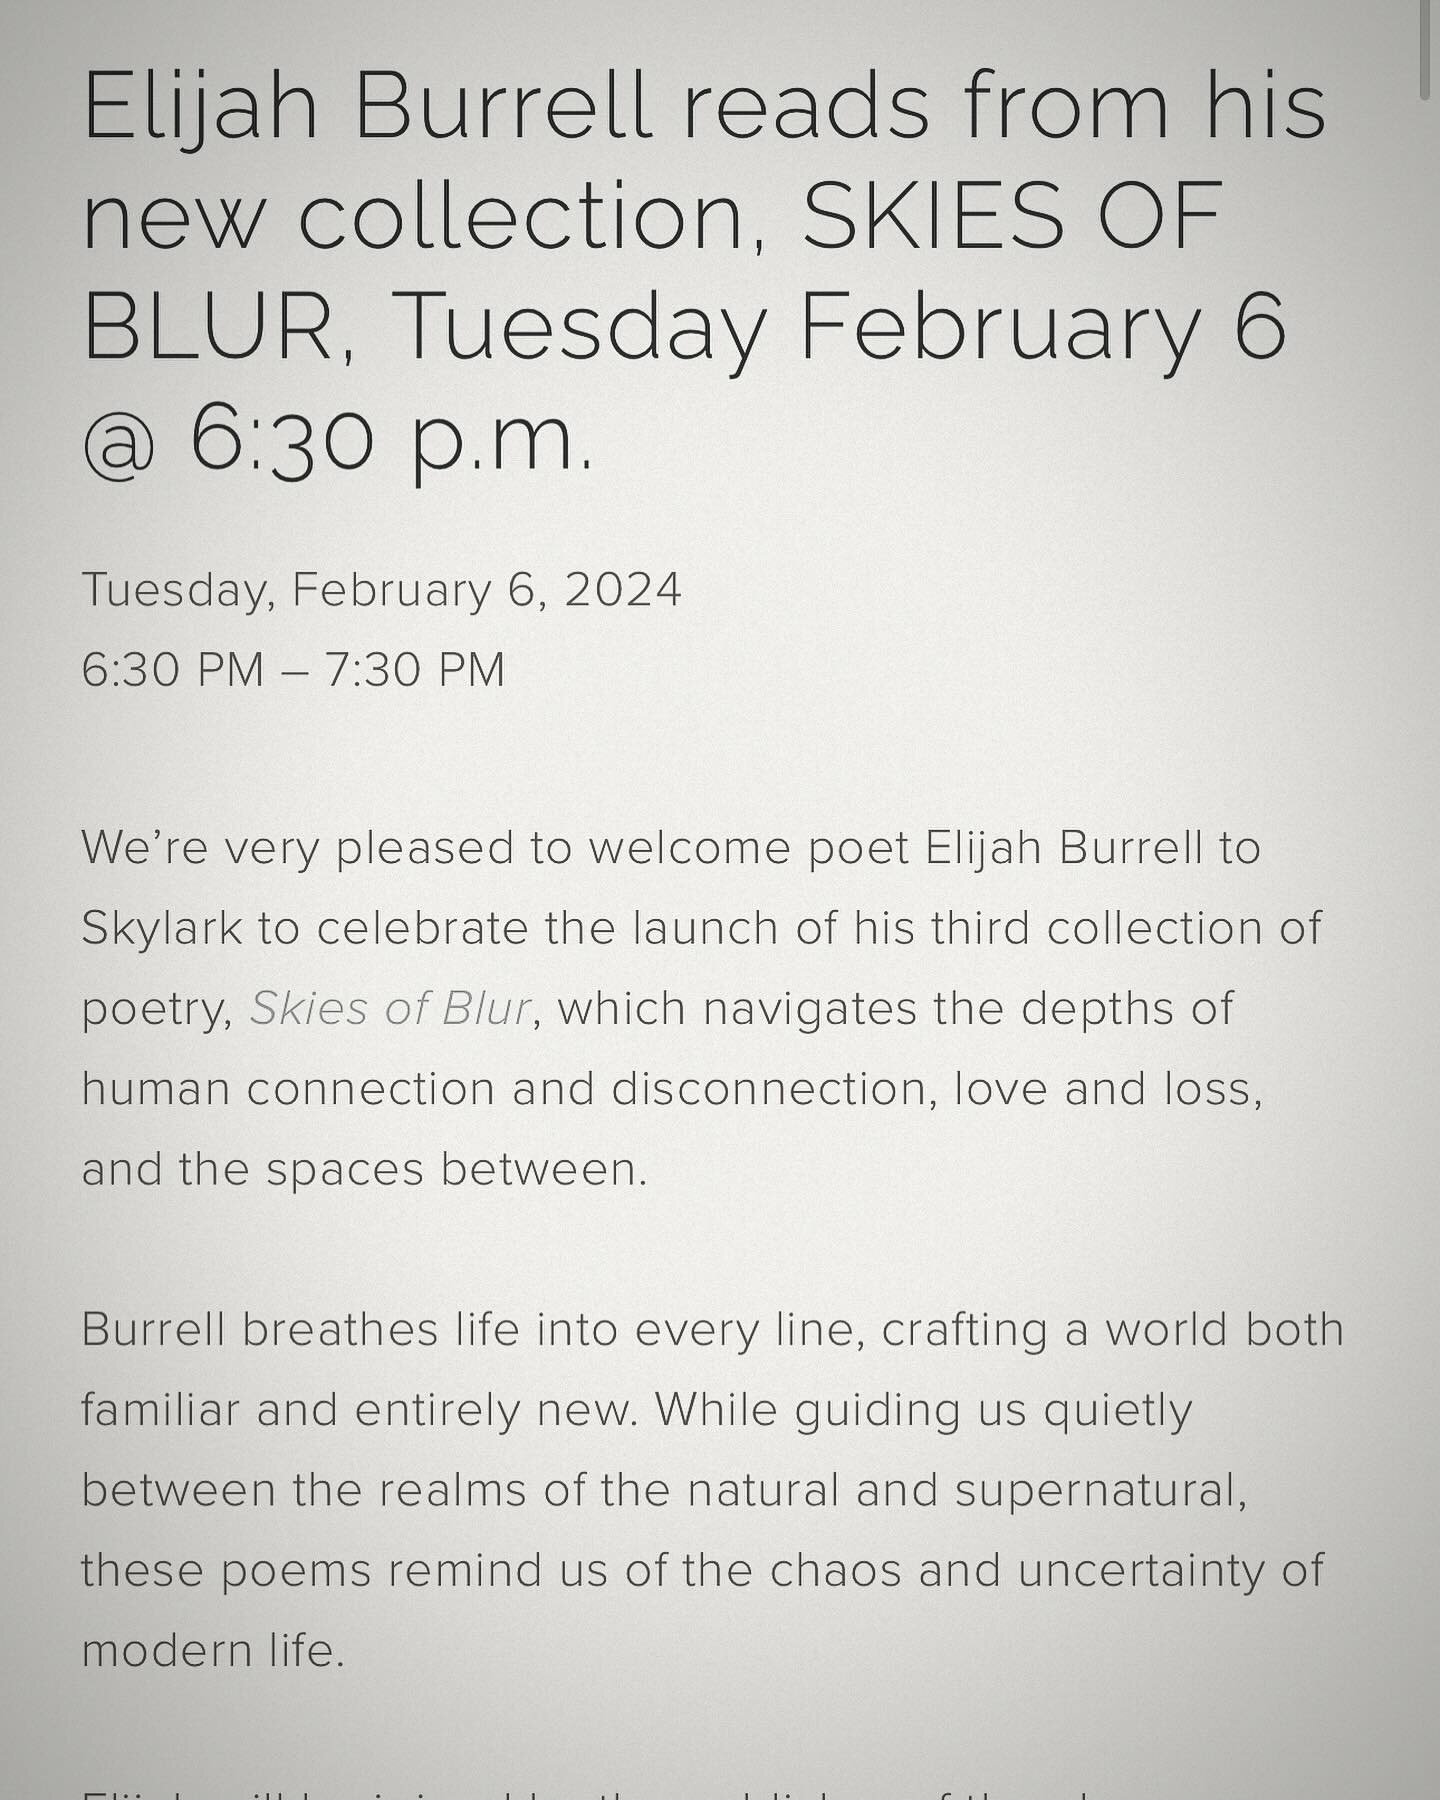 Come on out for the Feb 6th Reading and SKIES OF BLUR book launch at Skylark Bookshop in Columbia, MO. Starts @ 6:30pm!